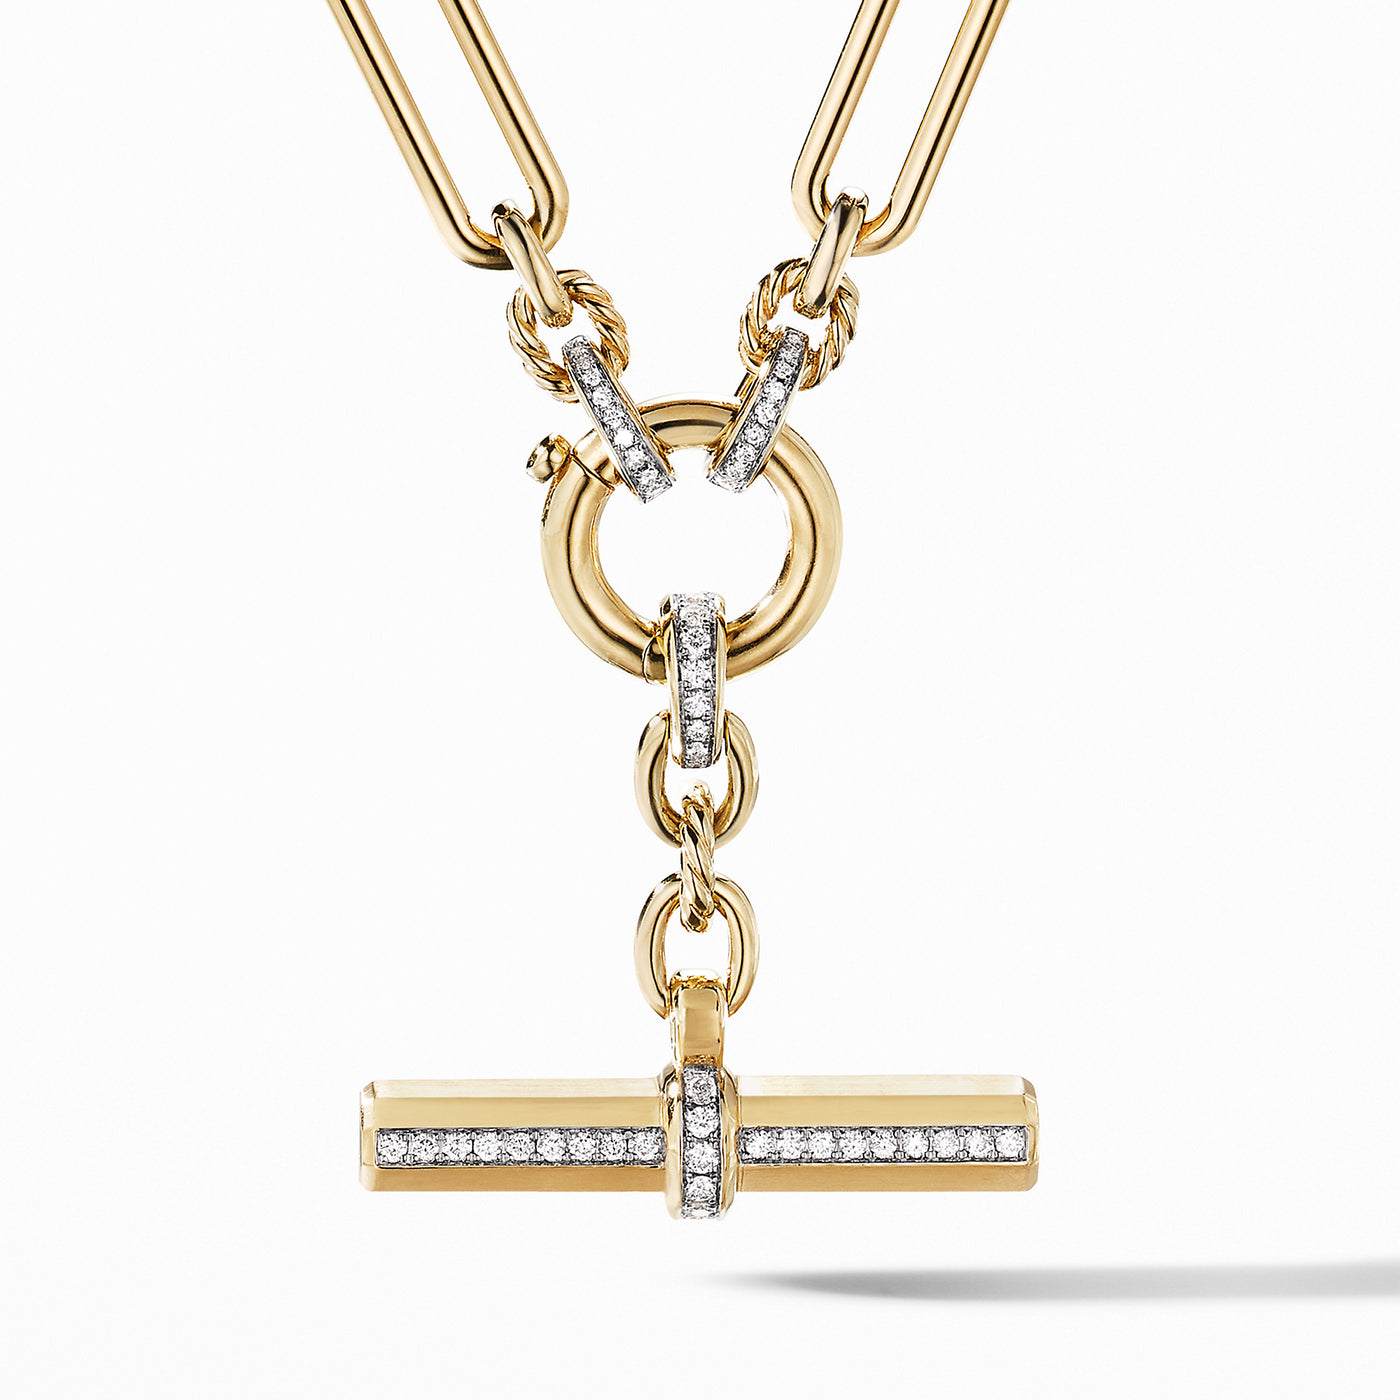 Lexington E/W Chain Necklace in 18K Yellow Gold with Diamonds\, 6.5mm